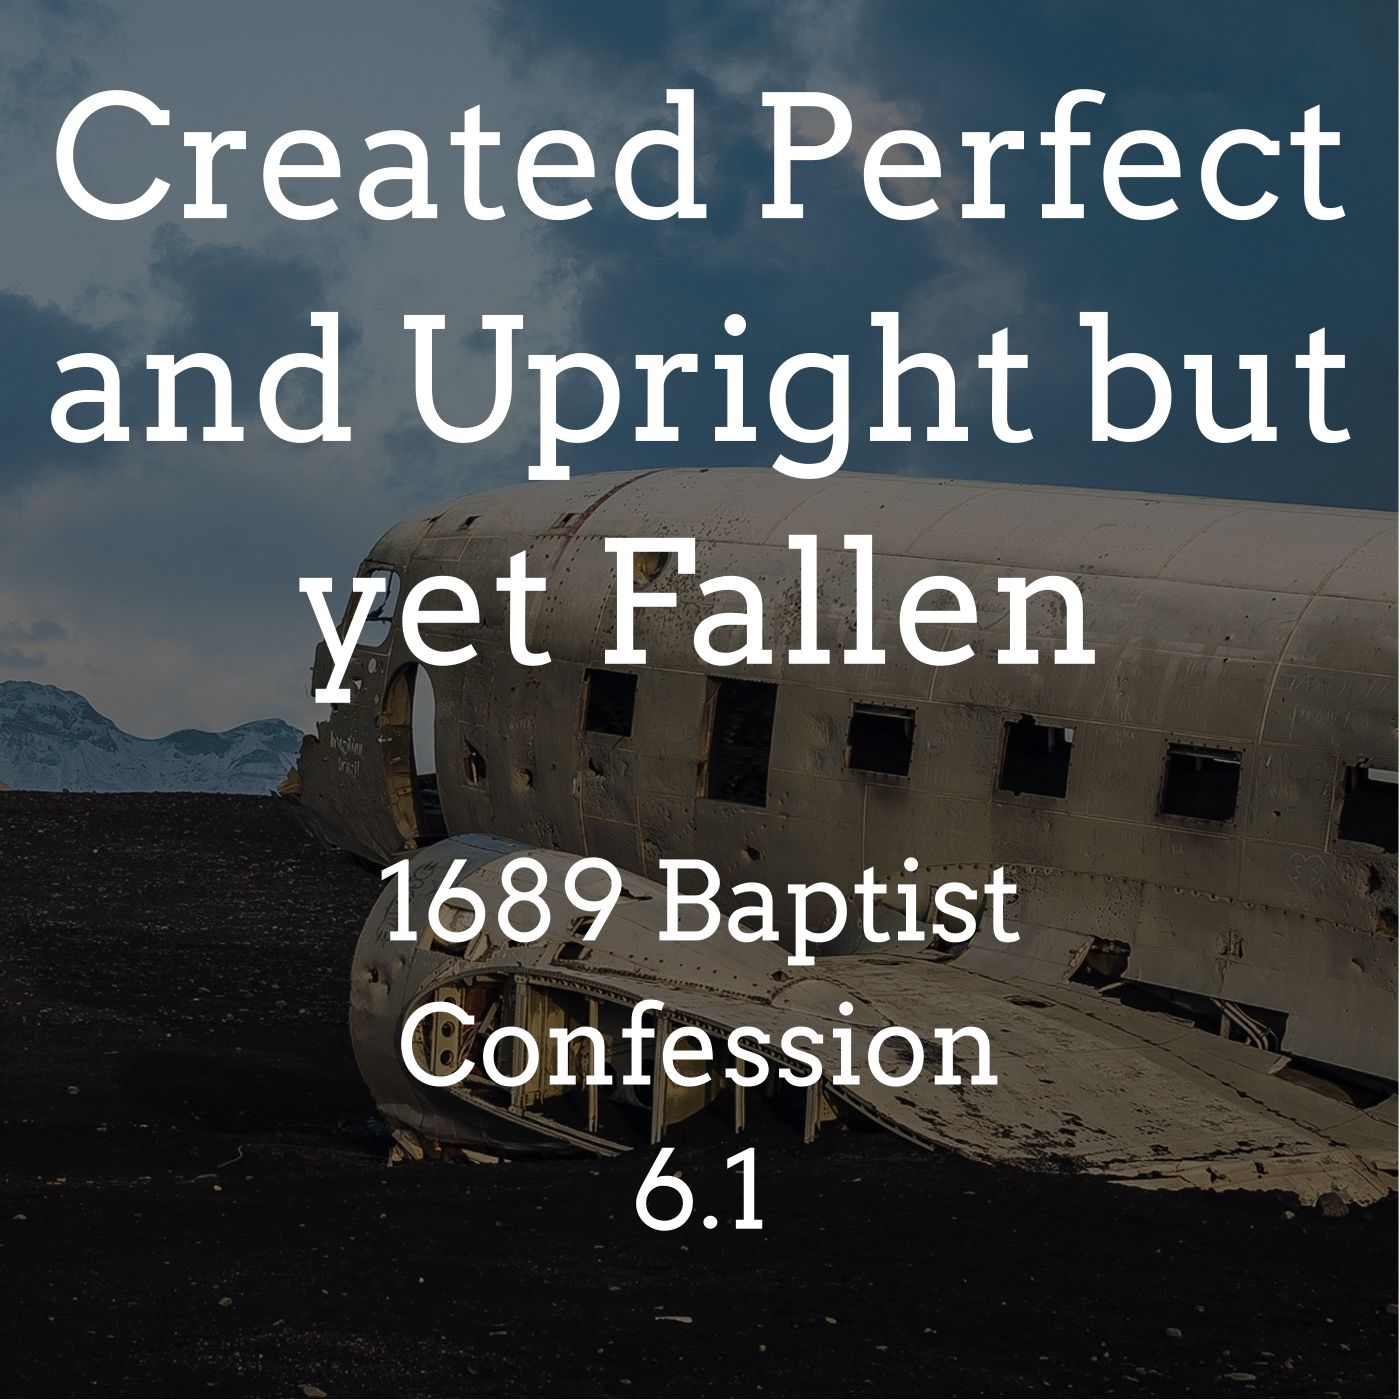 #43 Created Perfect and Upright but Yet They Fell - LBC 6.1